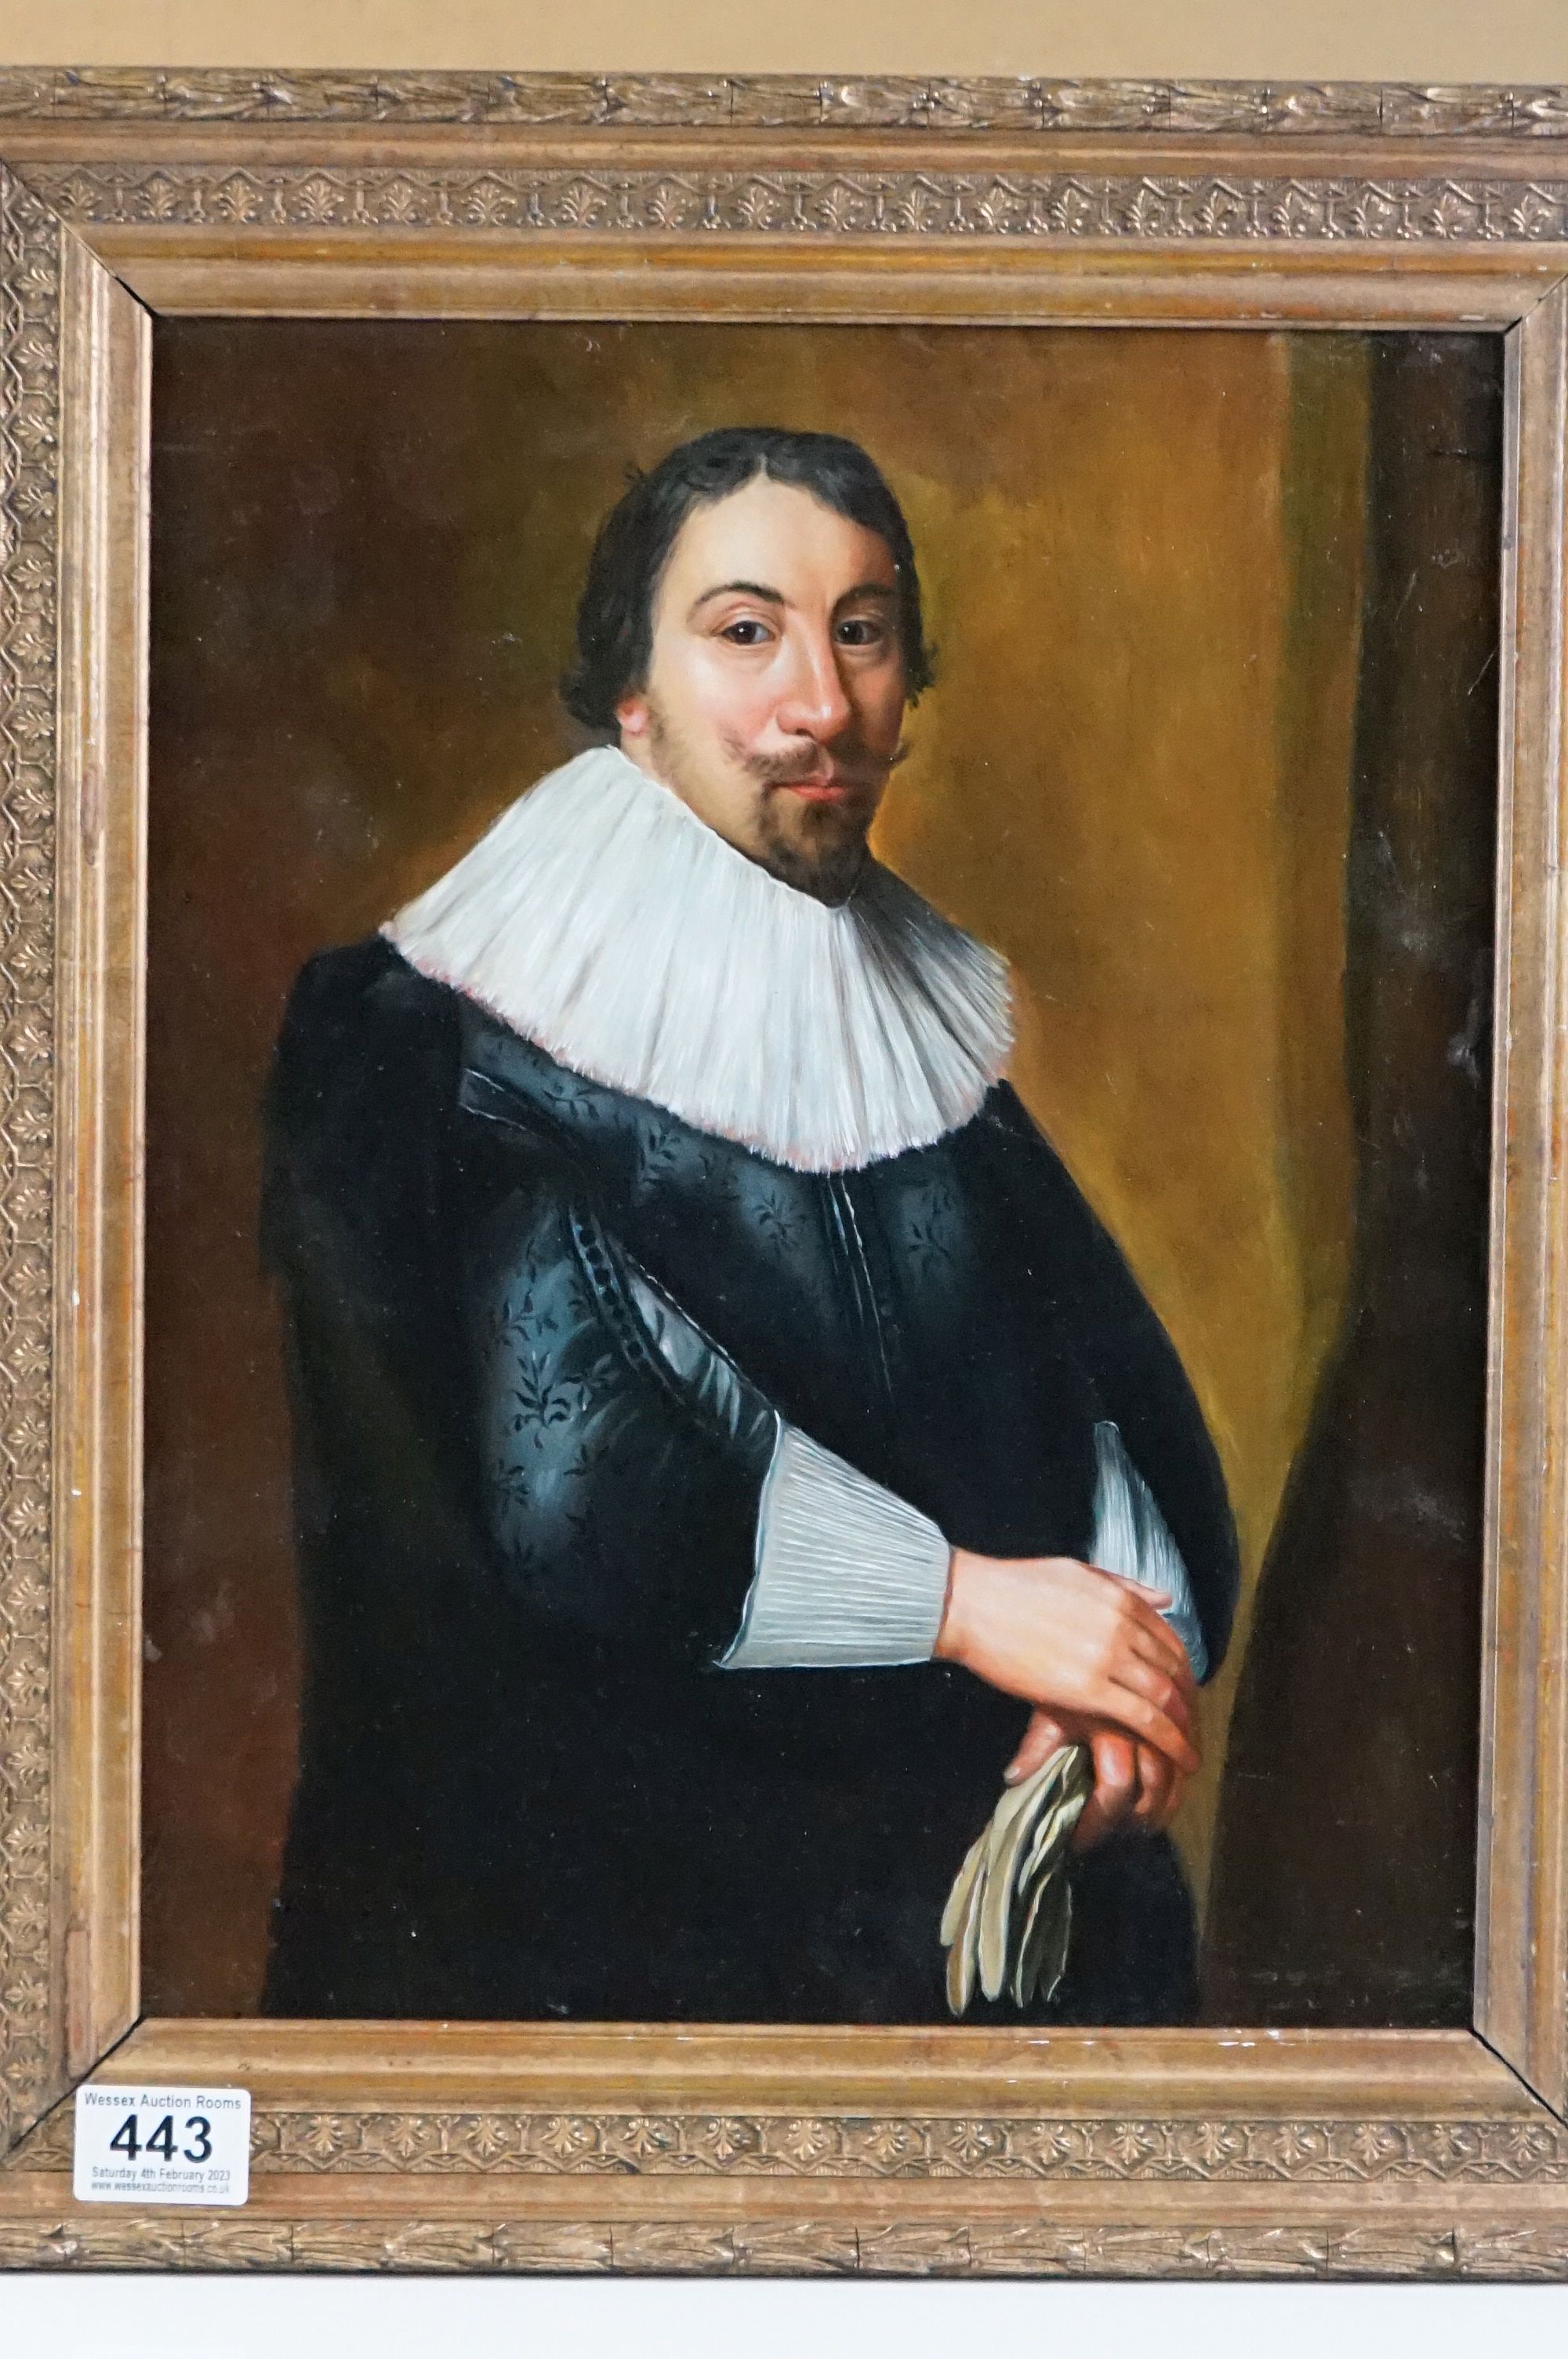 Oil on Panel Portrait of a Distinguished 17th century Gentleman in Gown with Ruff Collar and Sleeves - Image 2 of 6